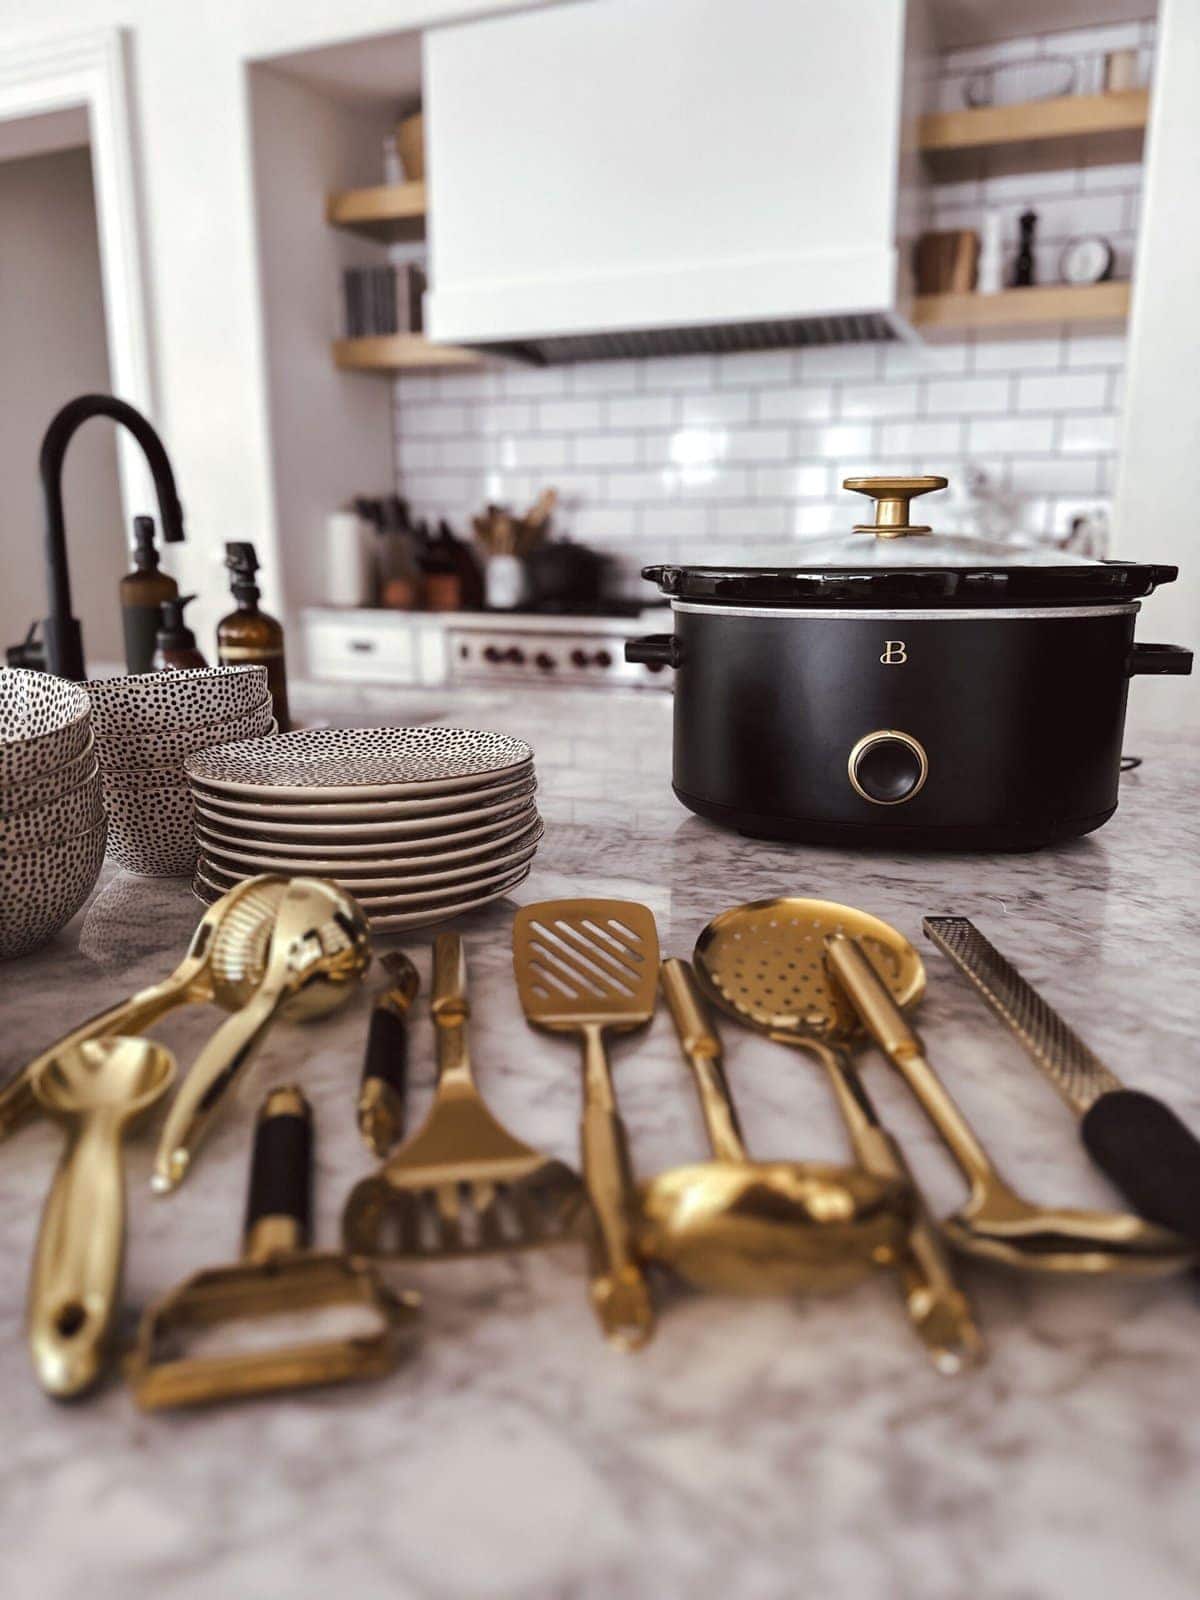 Drew Barrymore's slow cookers are perfect for small kitchens